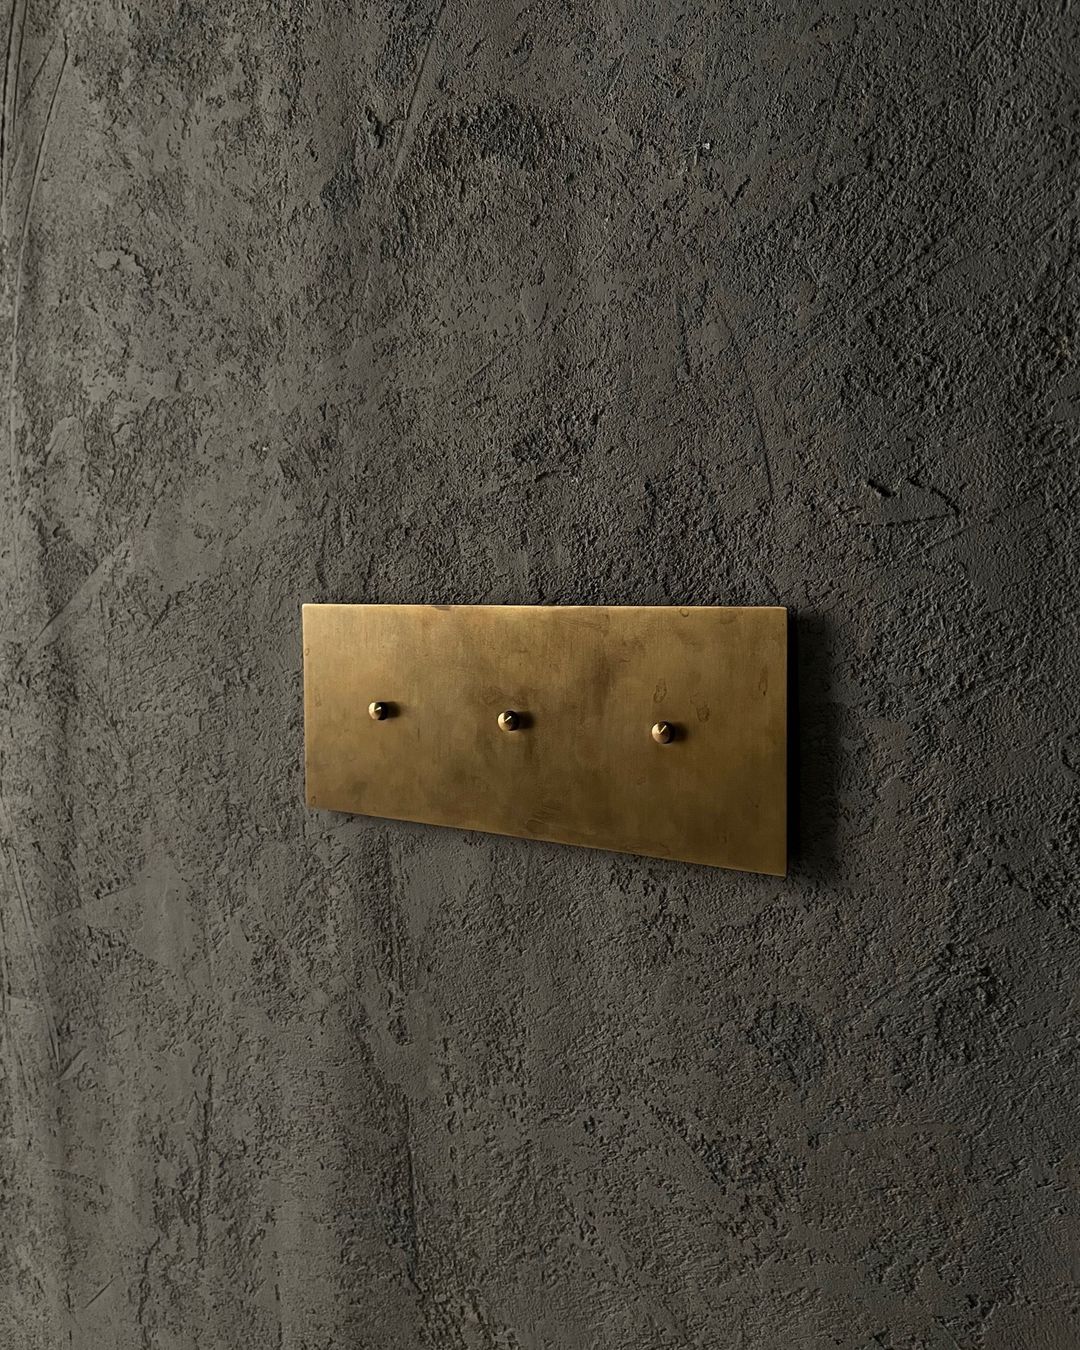 More Switch in Soft Polished Brass With Two Push Buttons